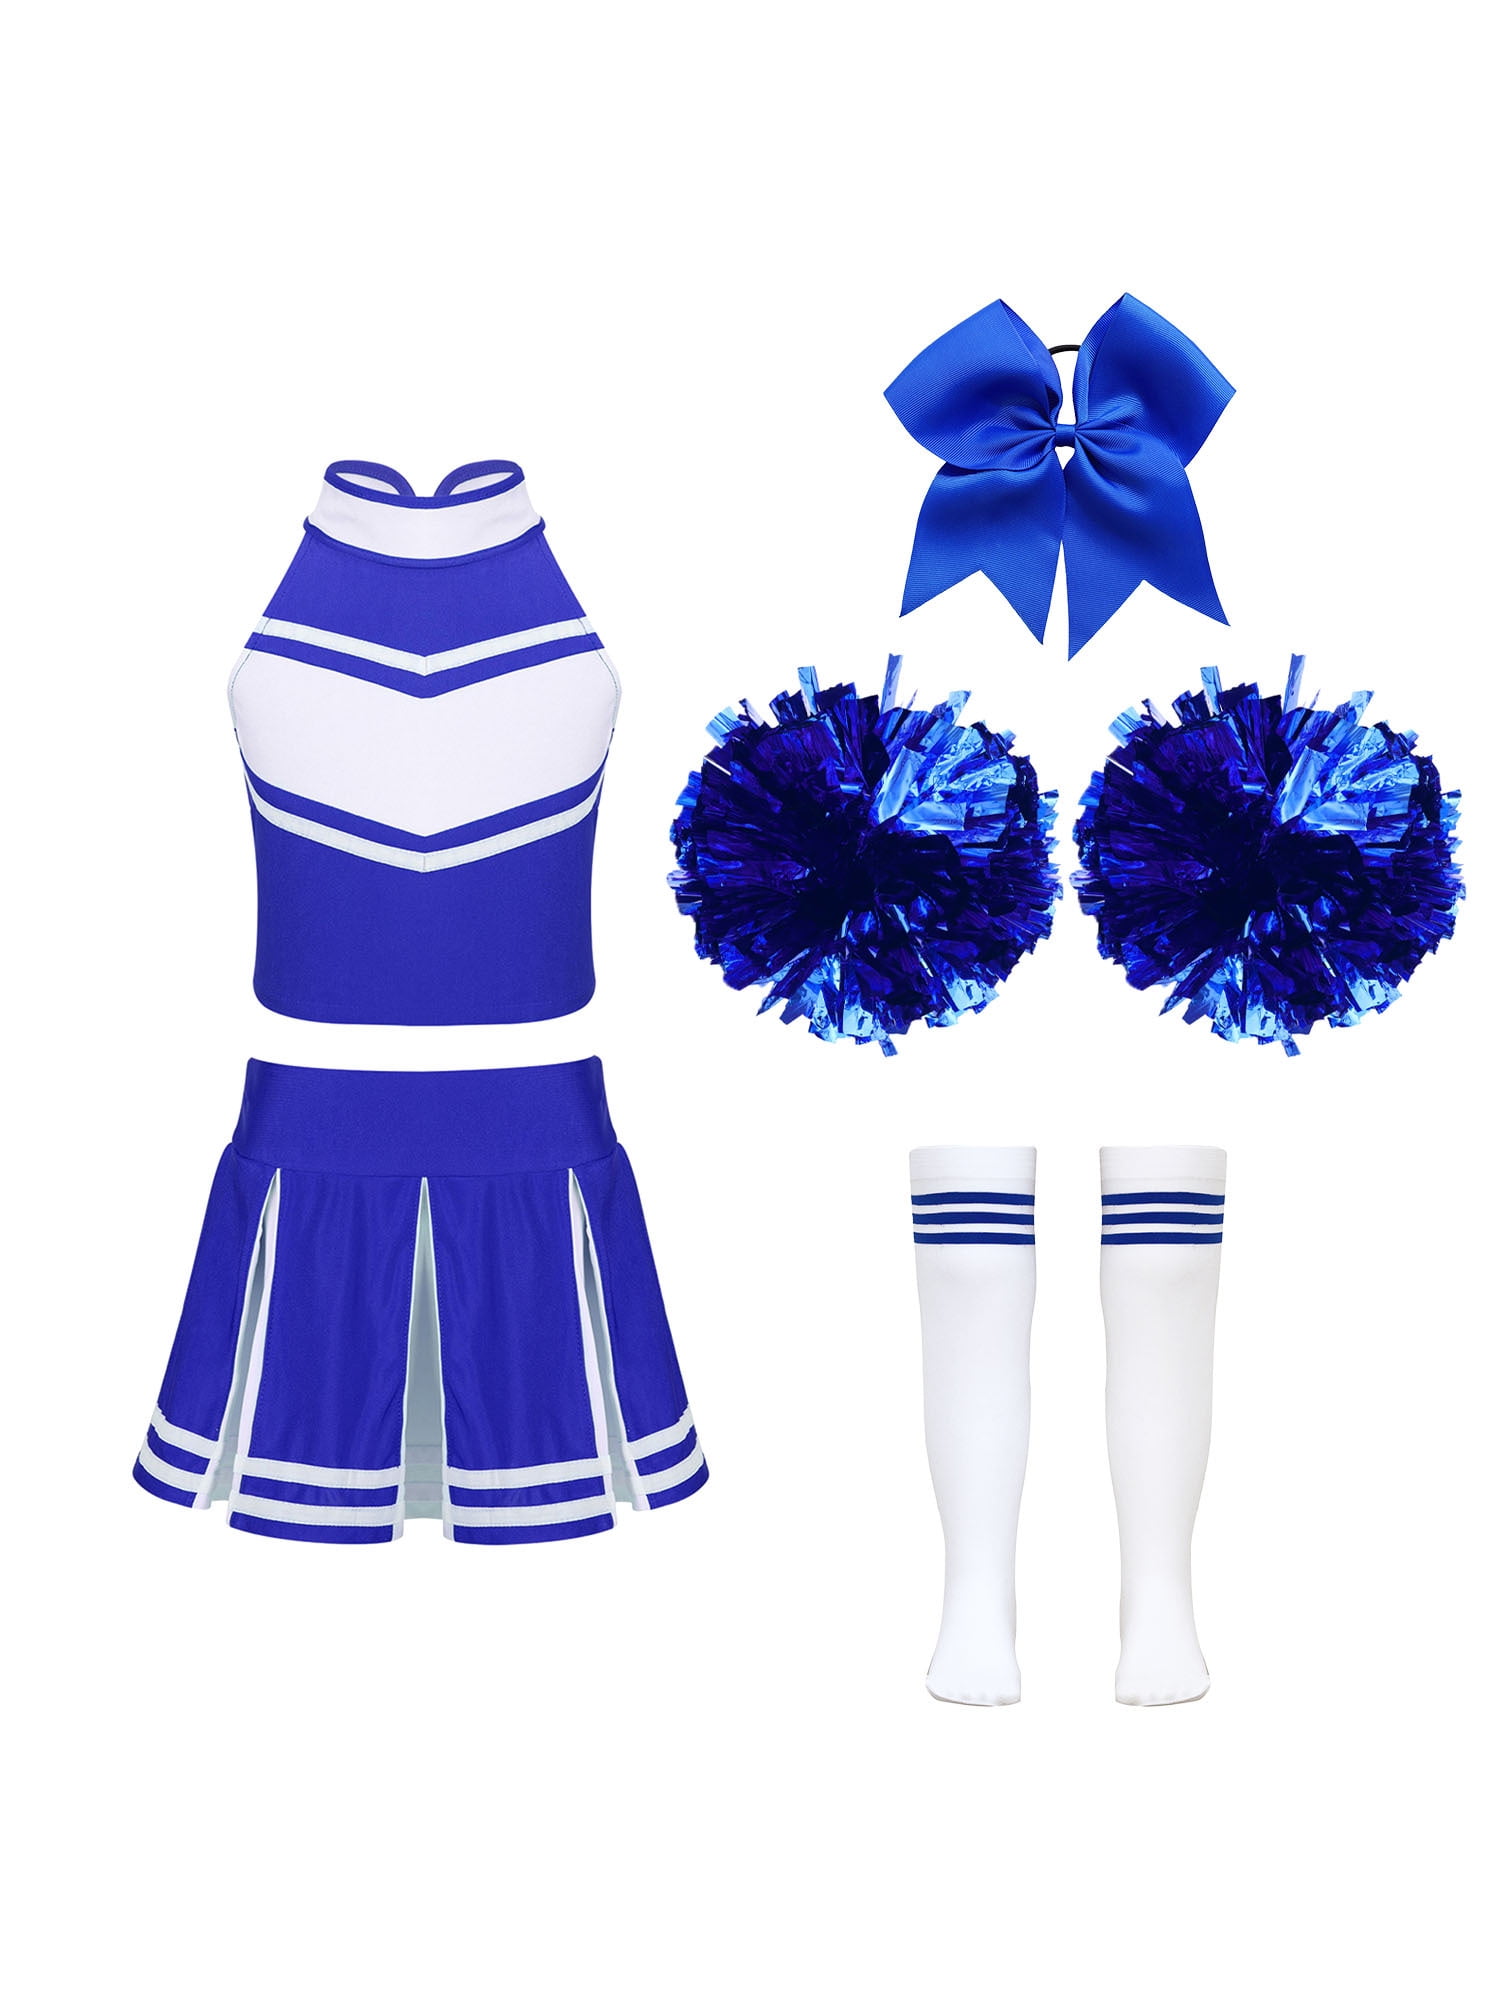 Msemis Cheer Leader Costume Cheerleader Outfits For Teen Girls 6 16 A